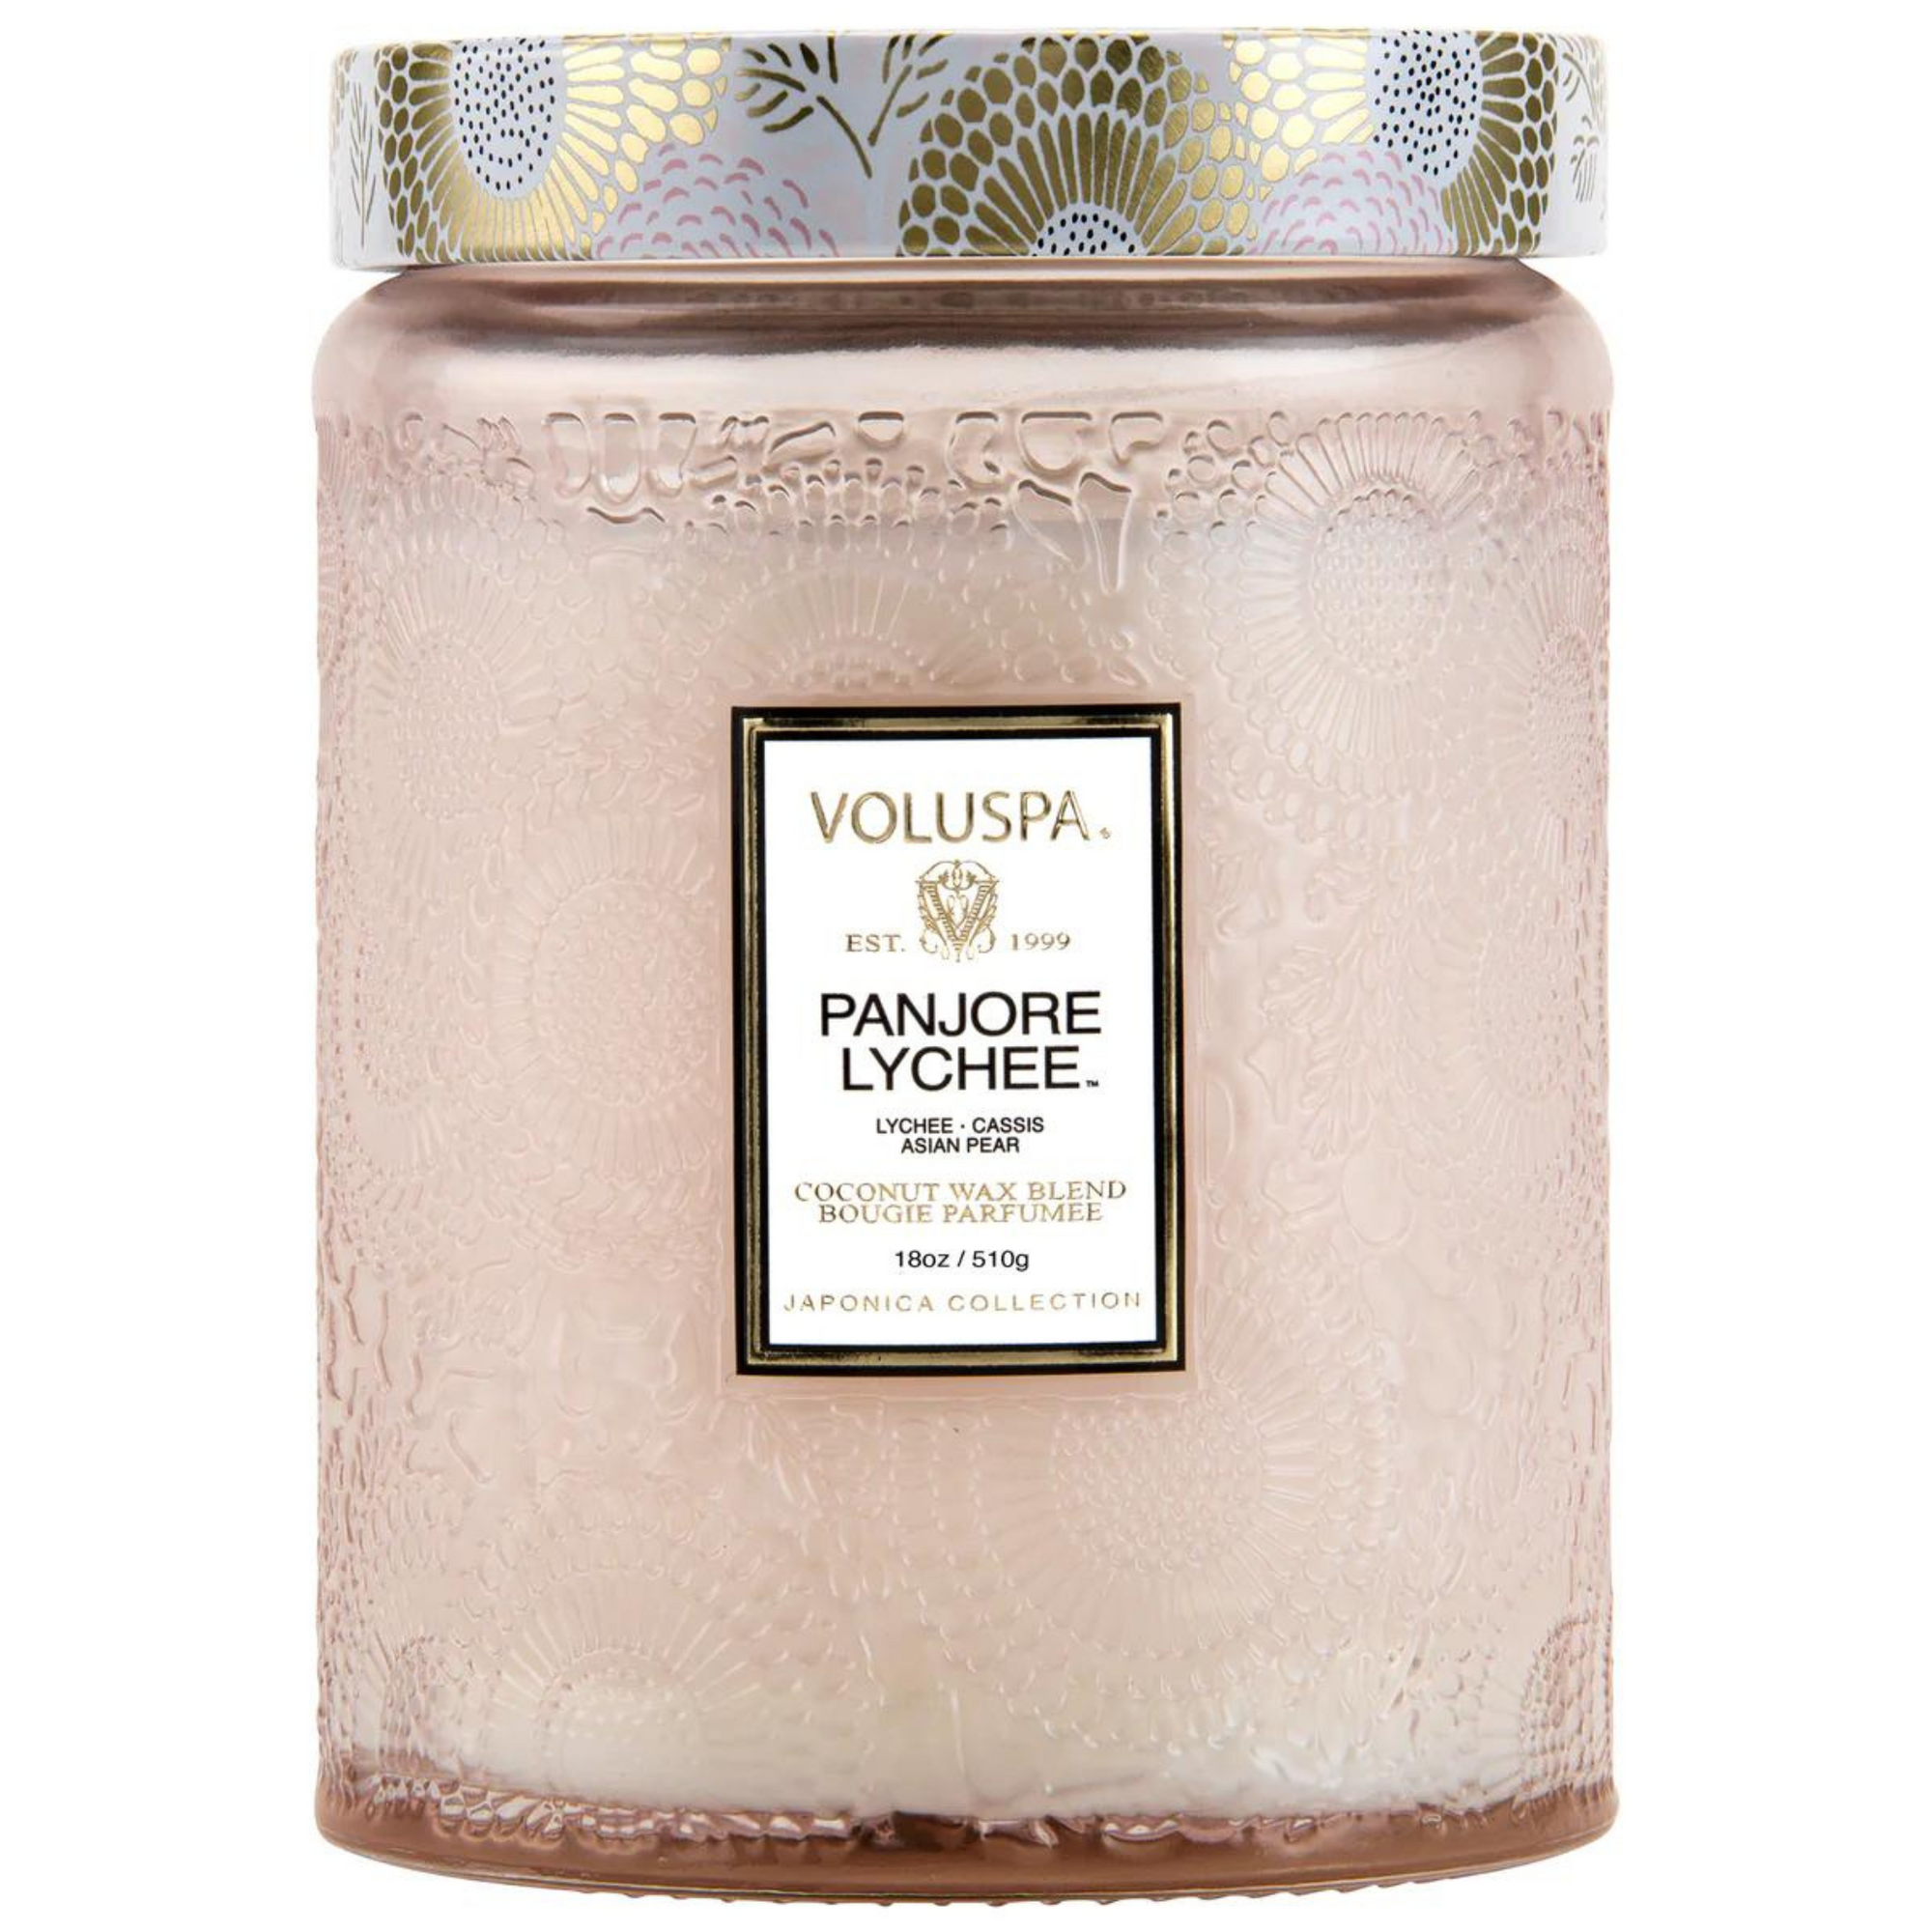 Panjore Lychee- Large Jar Candle